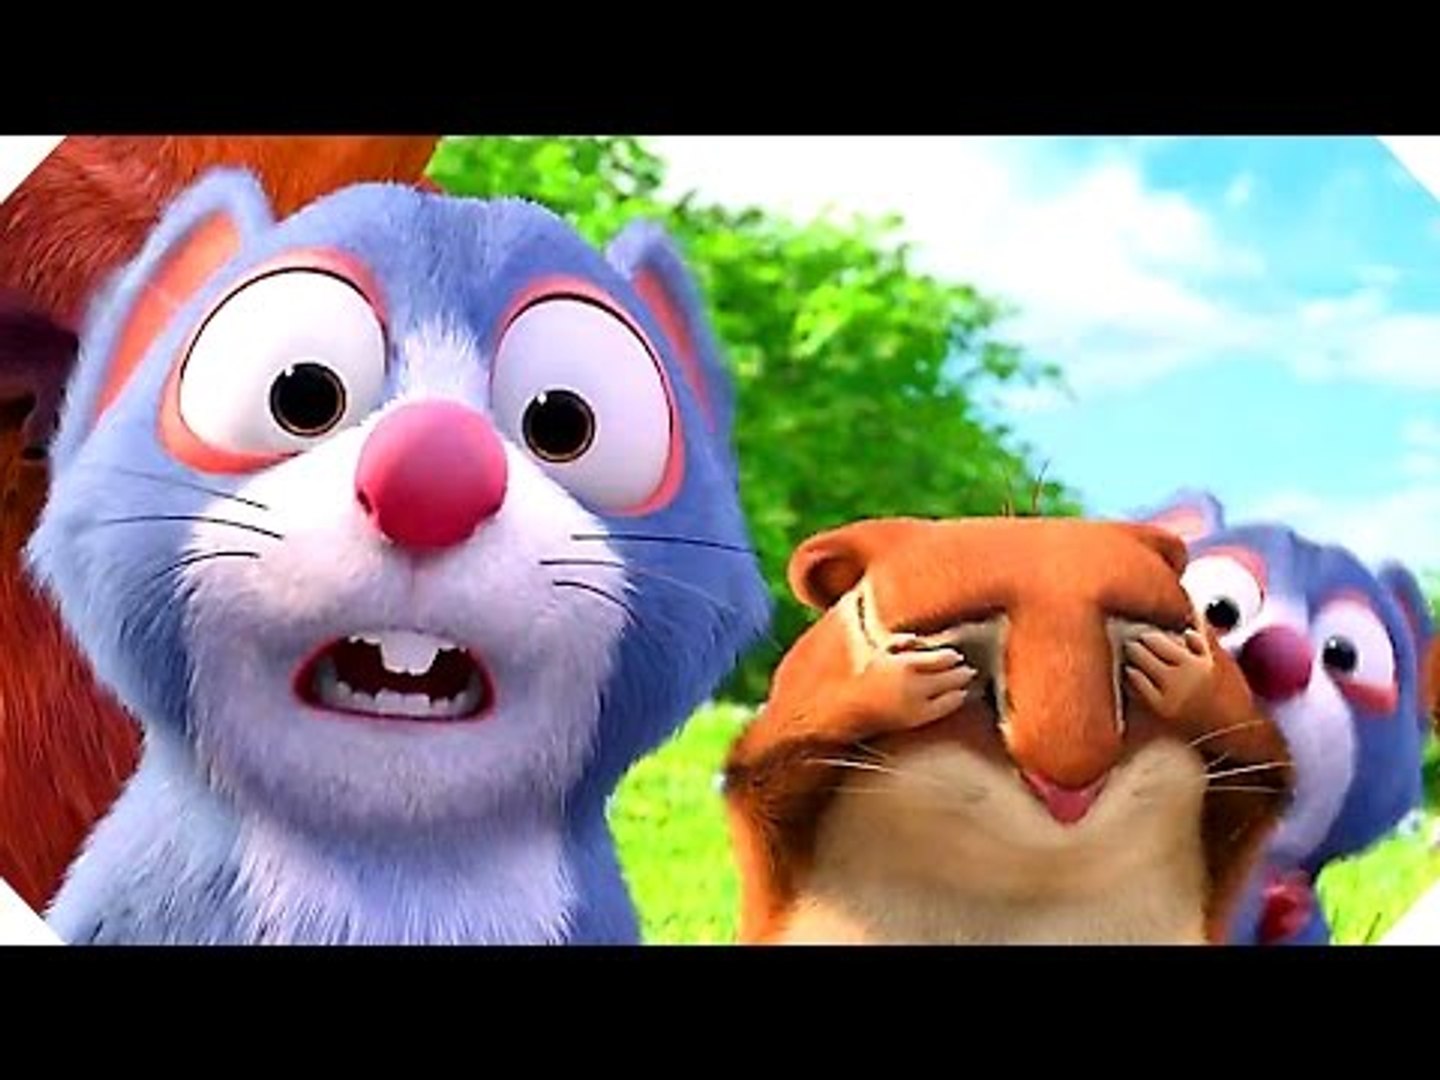 THE NUT JOB 2 - NEW Trailer (2017) Animation Movie HD - video Dailymotion